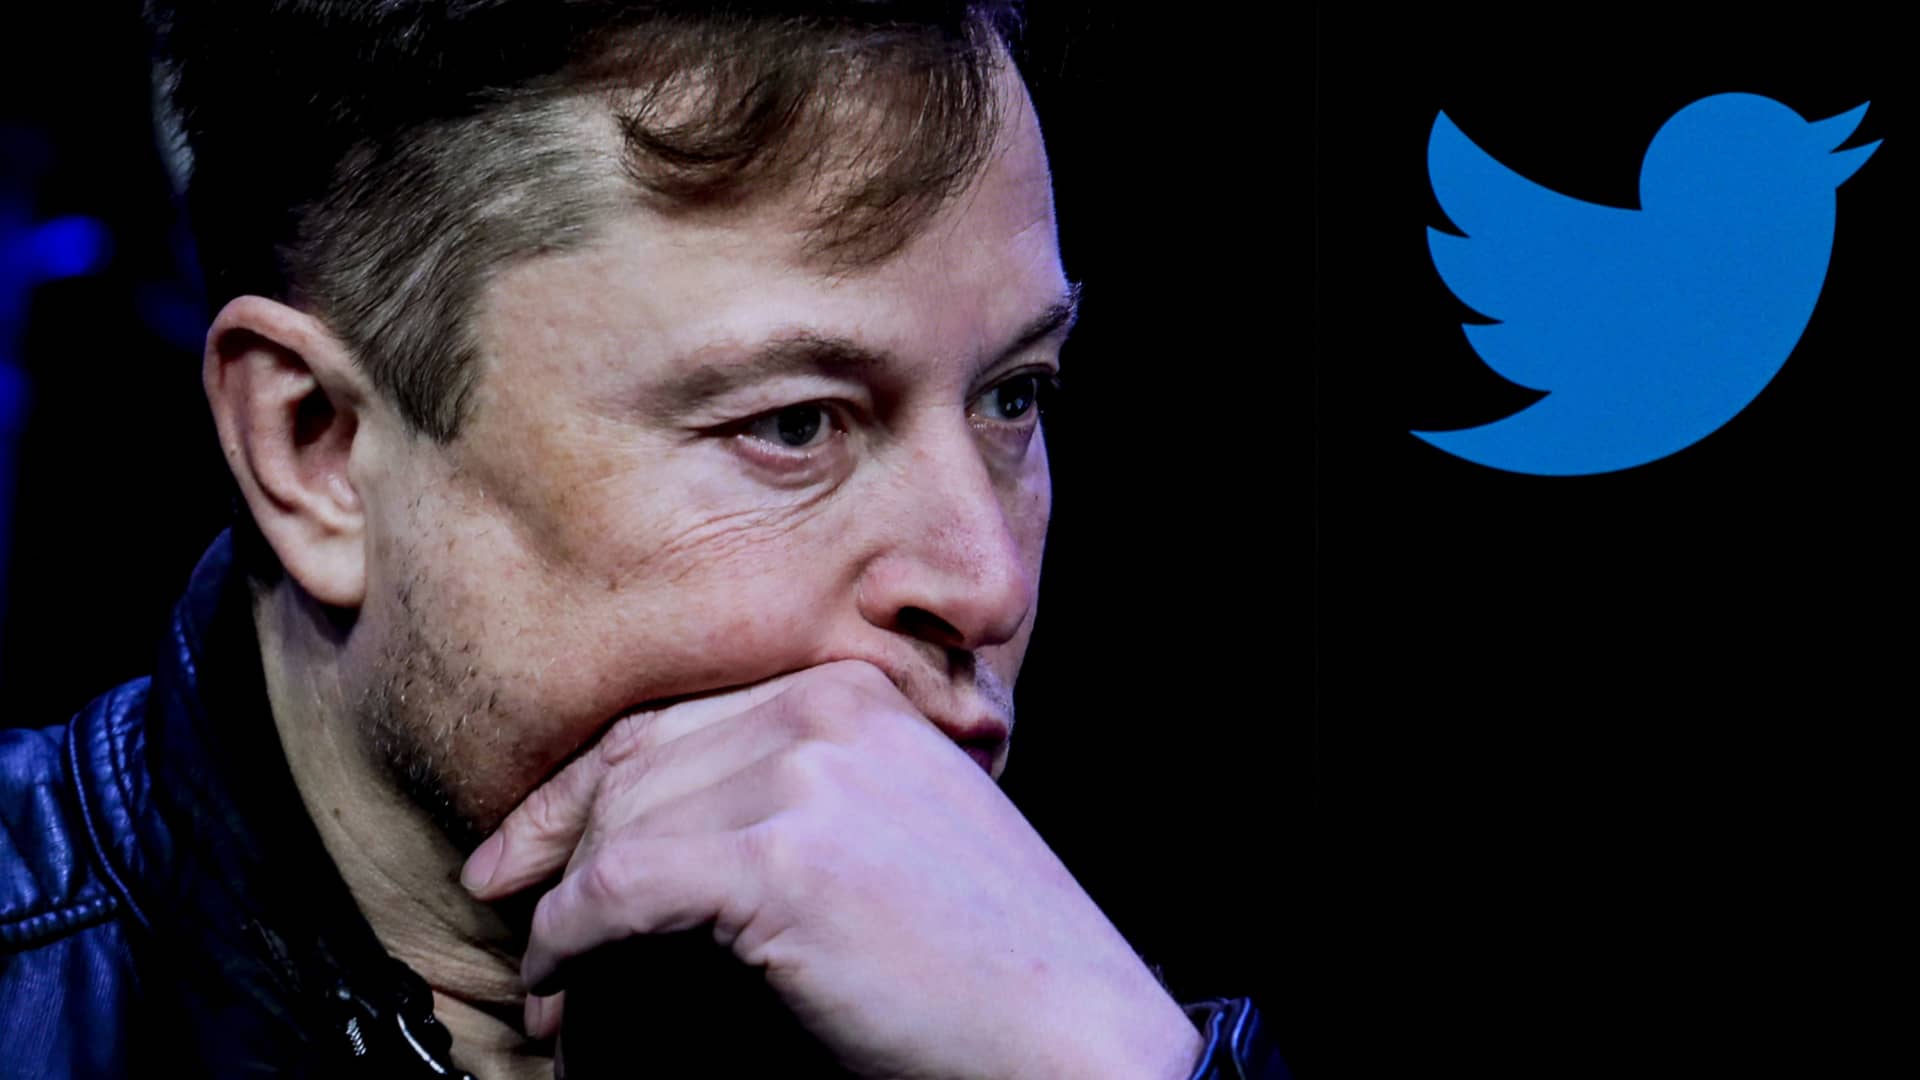 EU official warns Musk he’ll have to ‘fly by our rules’ as he buys Twitter